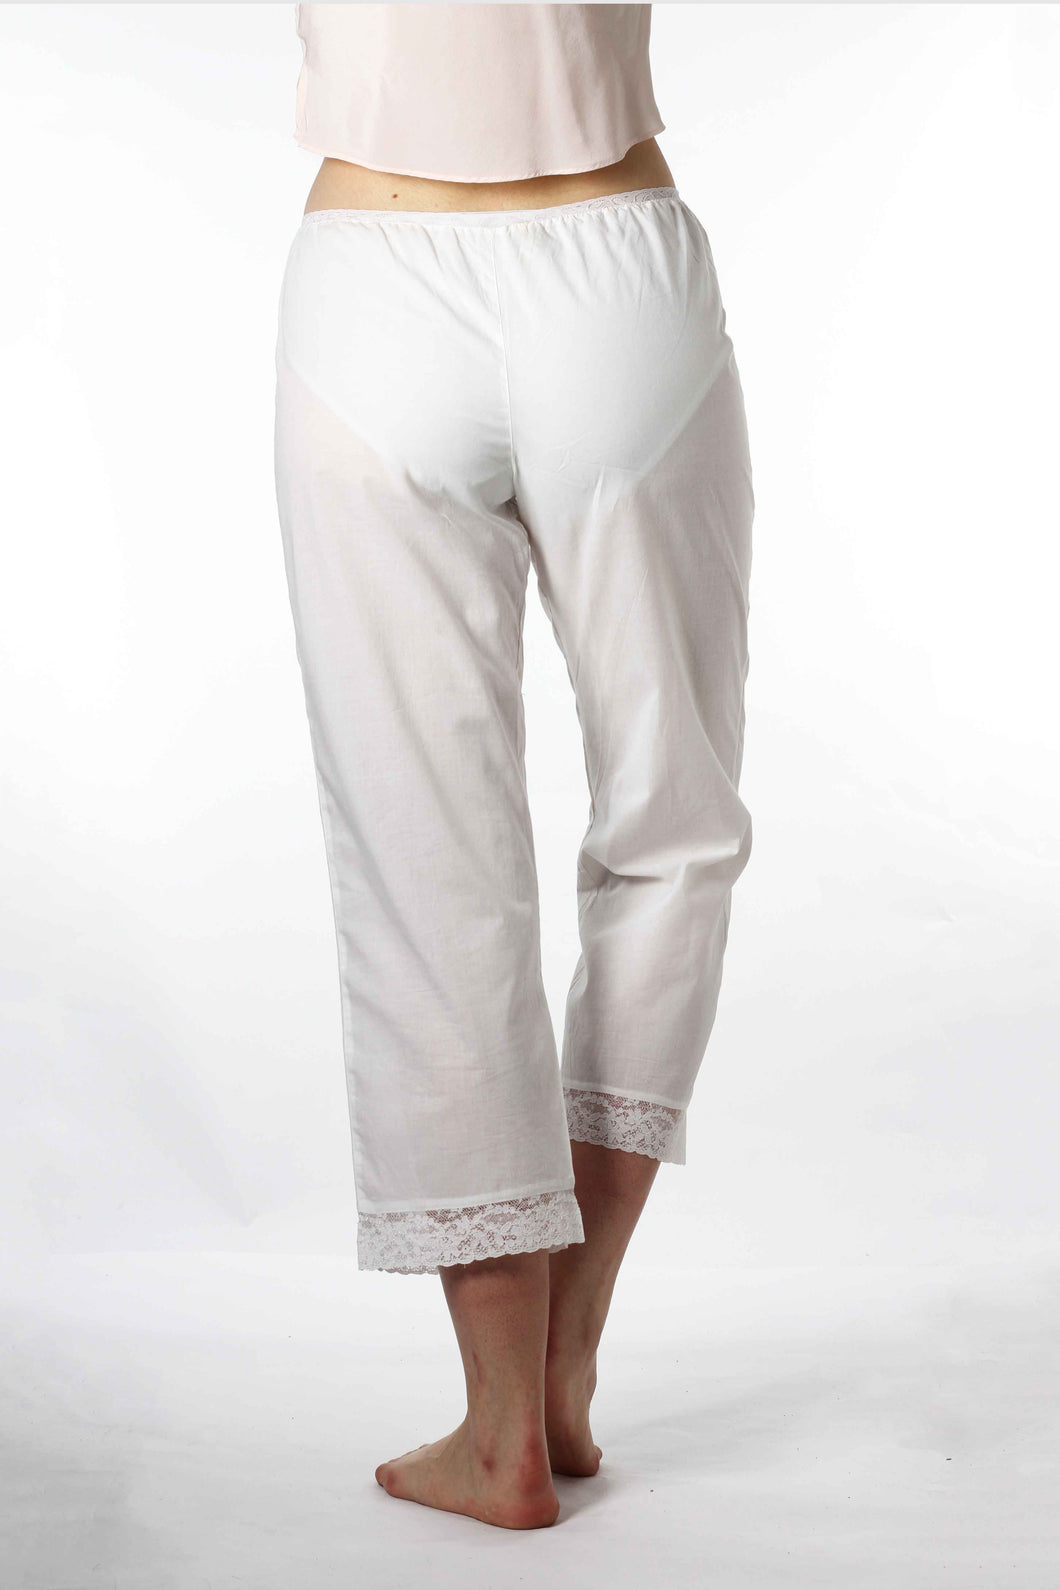 Premium cotton voile cropped pant, worn under a tunic, on the beach, or to bed.  Soft and comfy. A definite wardrobe favorite.